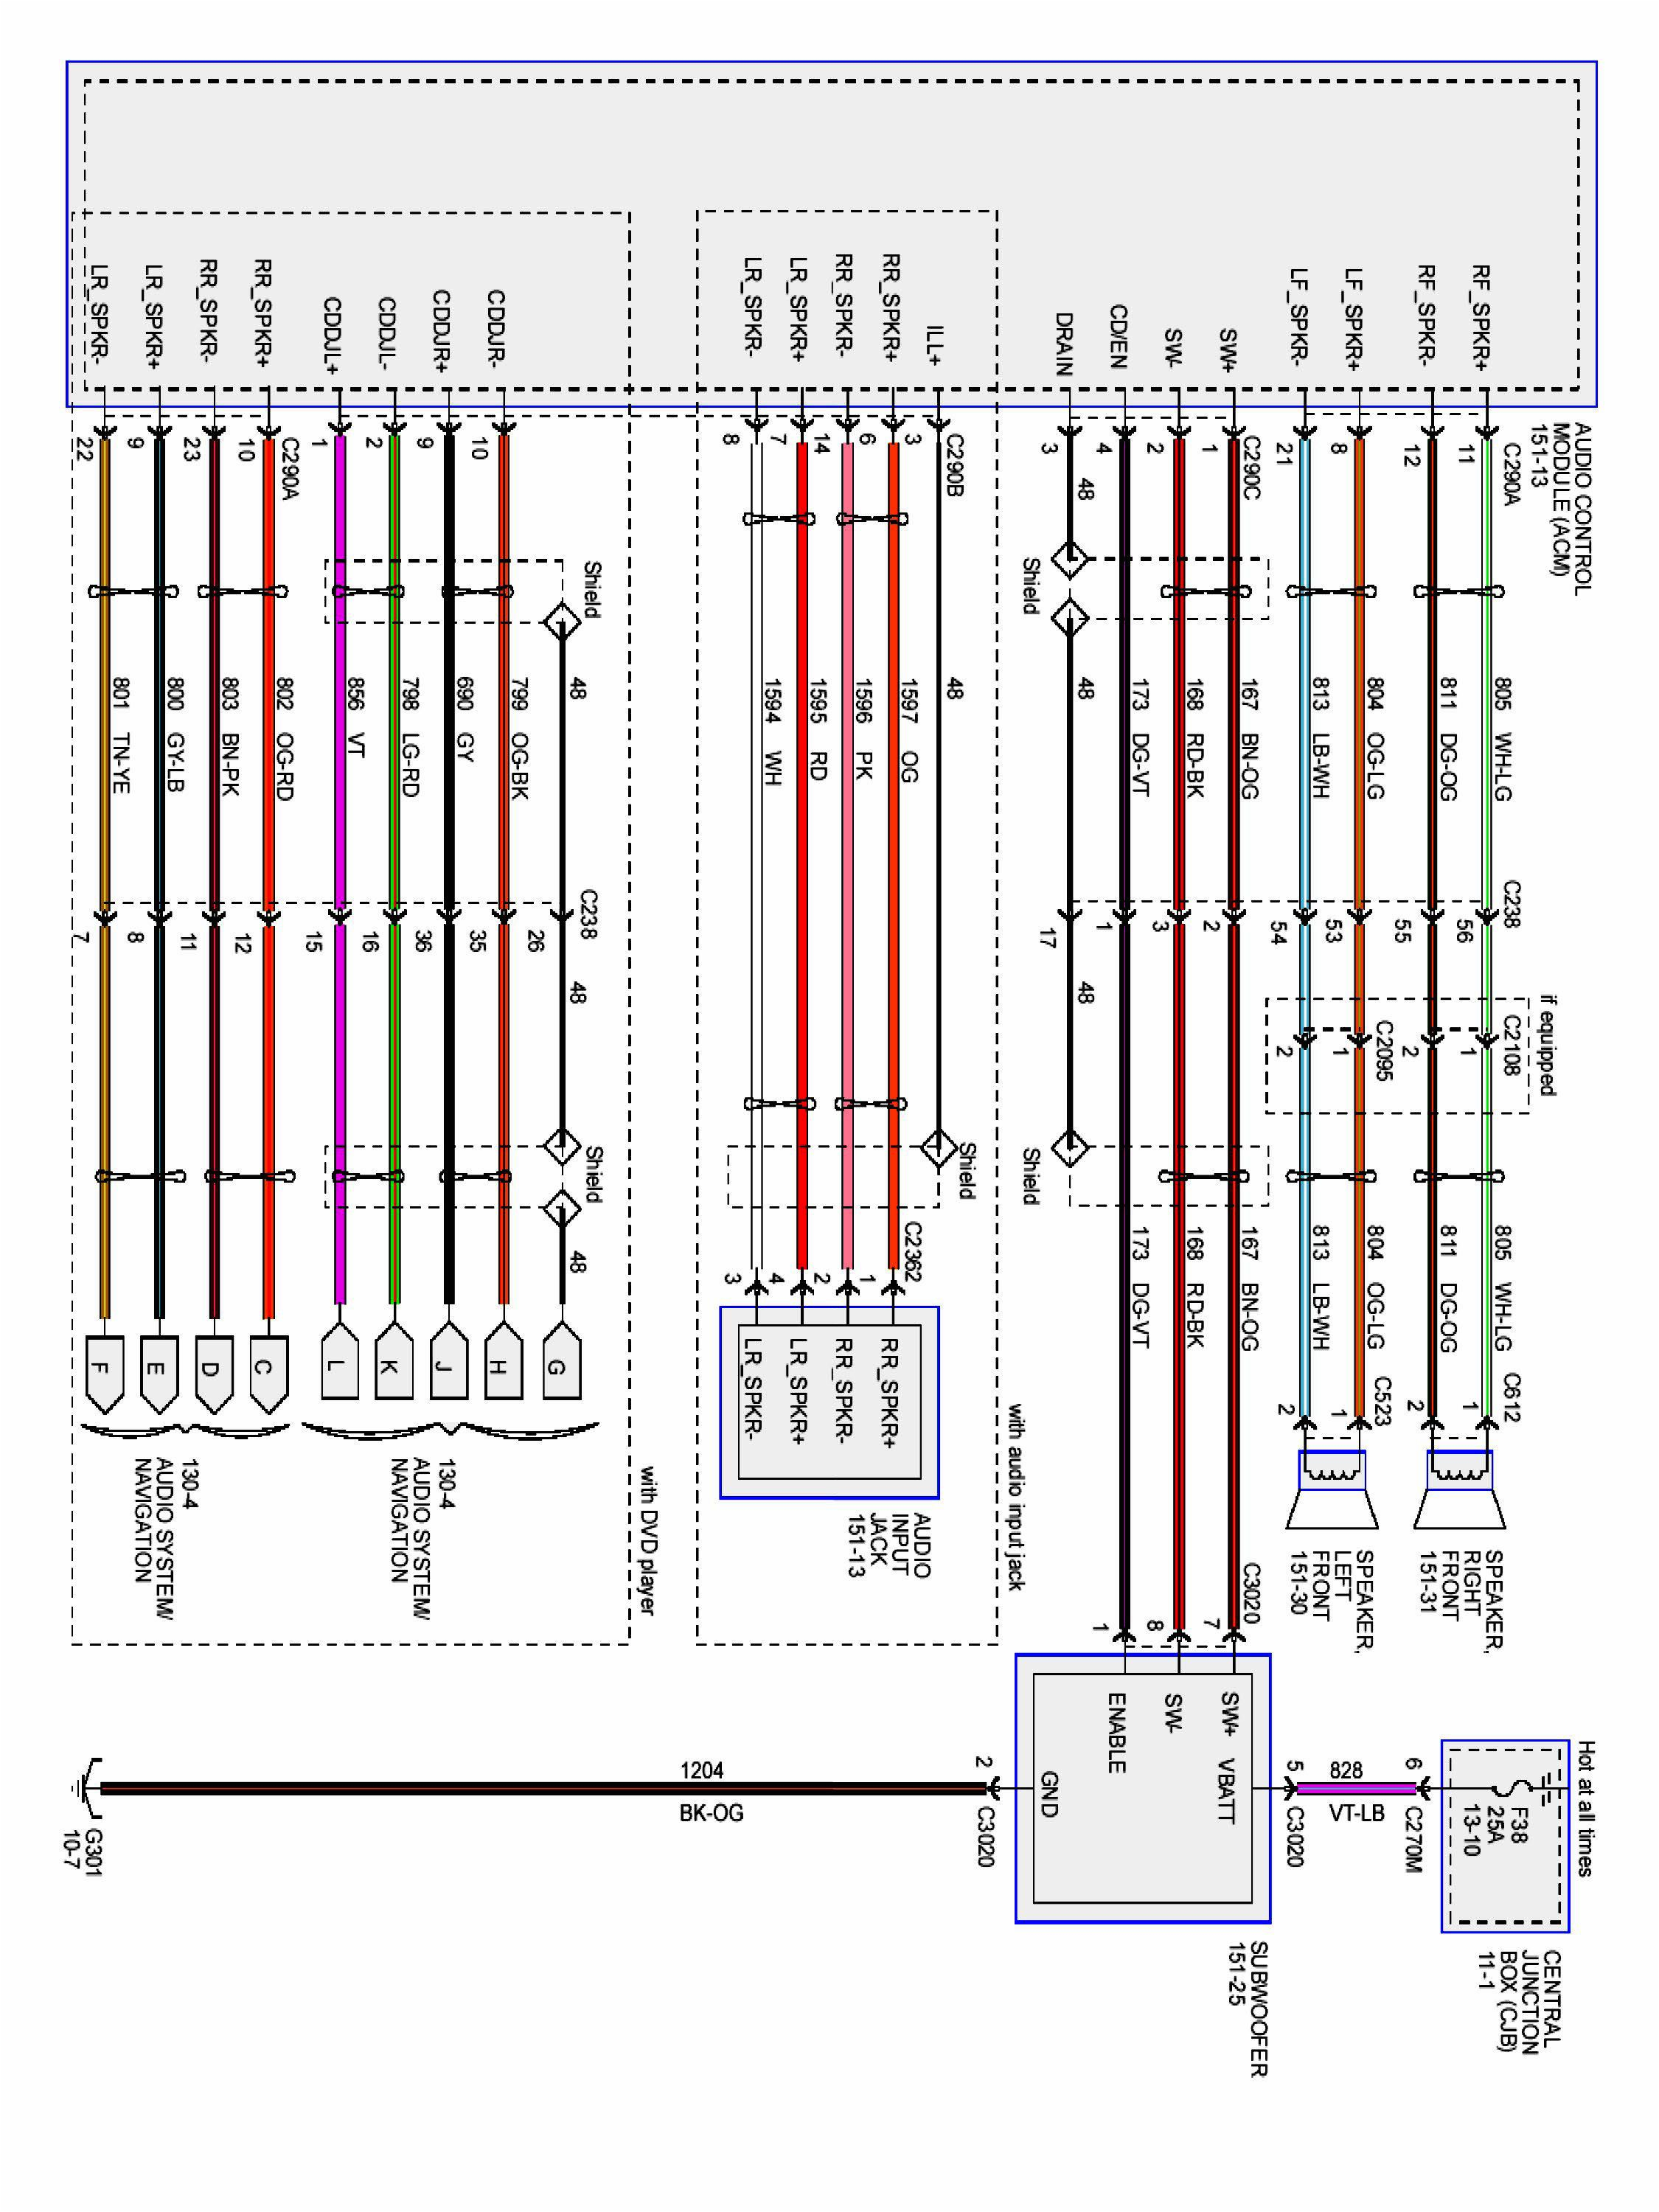 2010 ford f350 wiring harness wiring diagrams posts 2010 ford f350 wiring harness